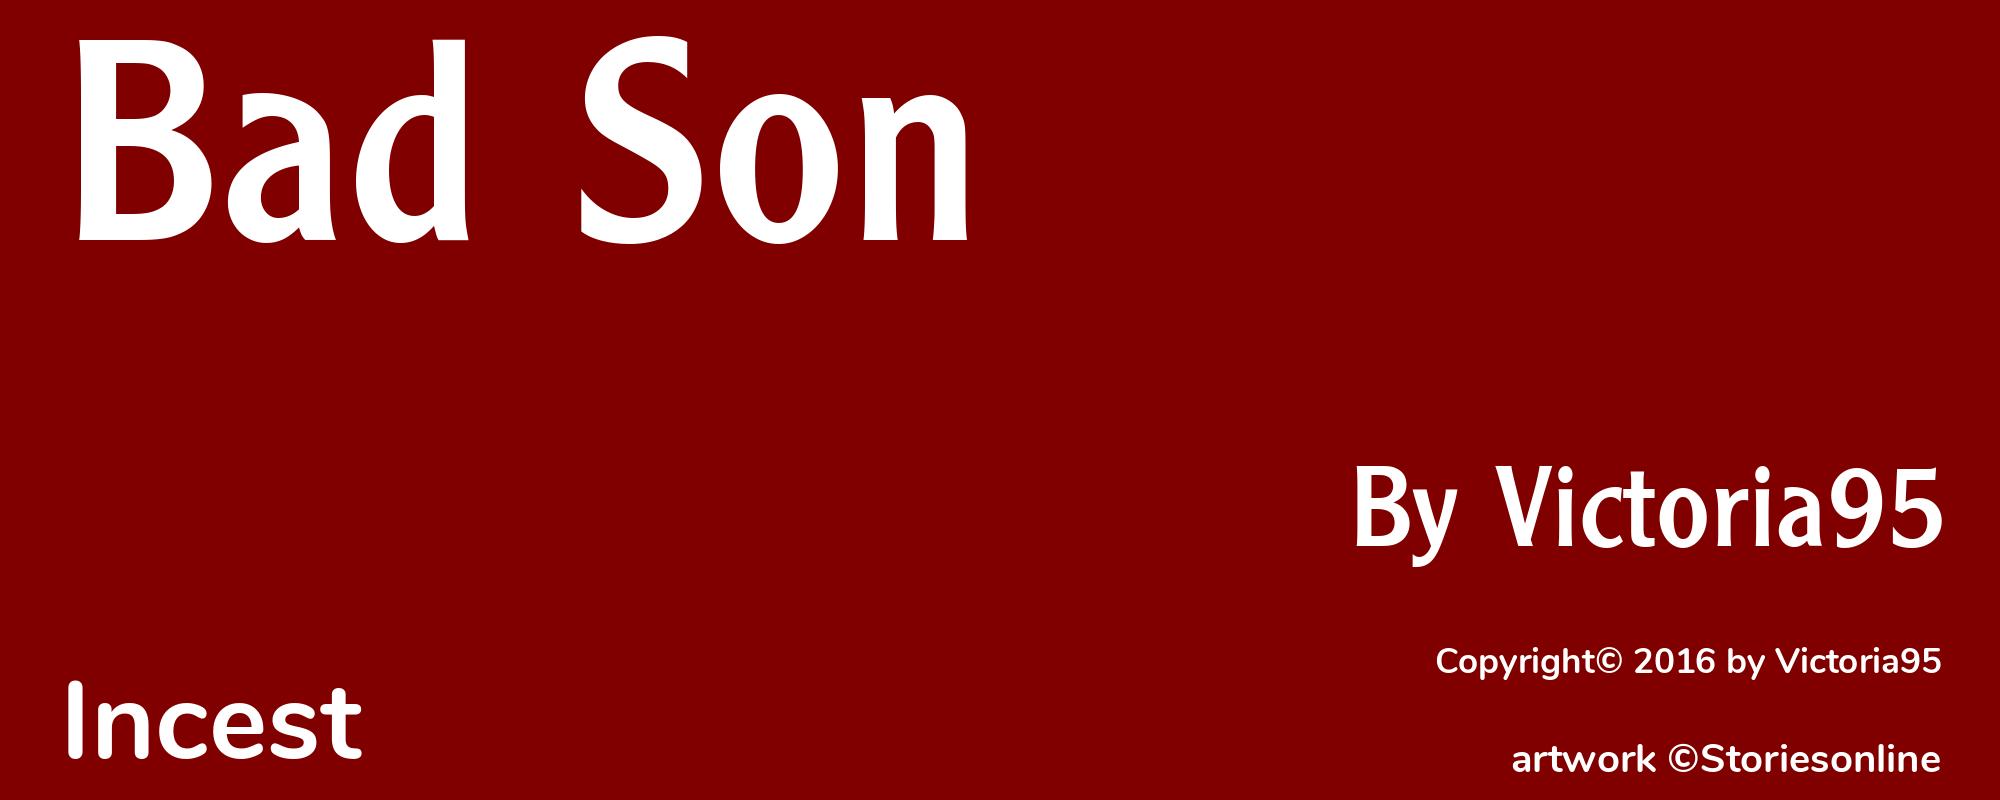 Bad Son - Cover